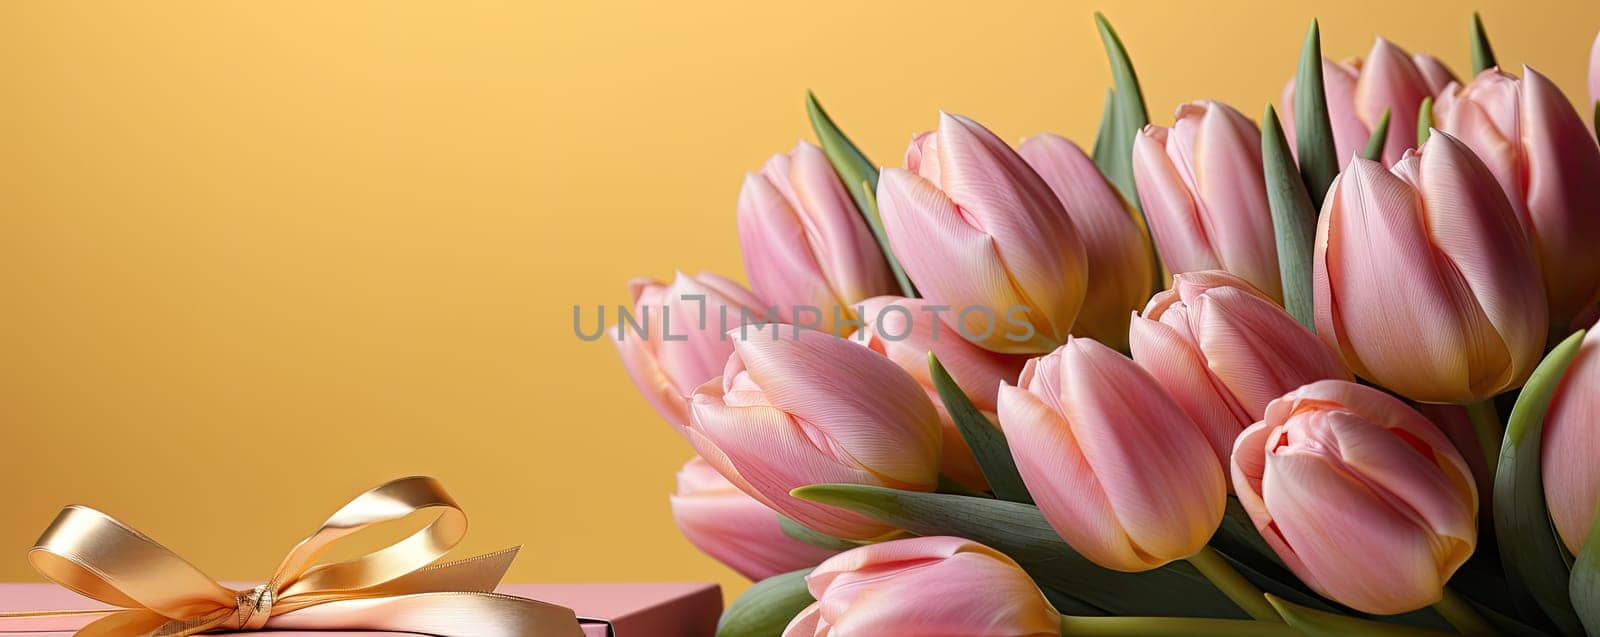 A bright spring banner with tulips on a bright yellow background is perfect for seasonal design and advertising